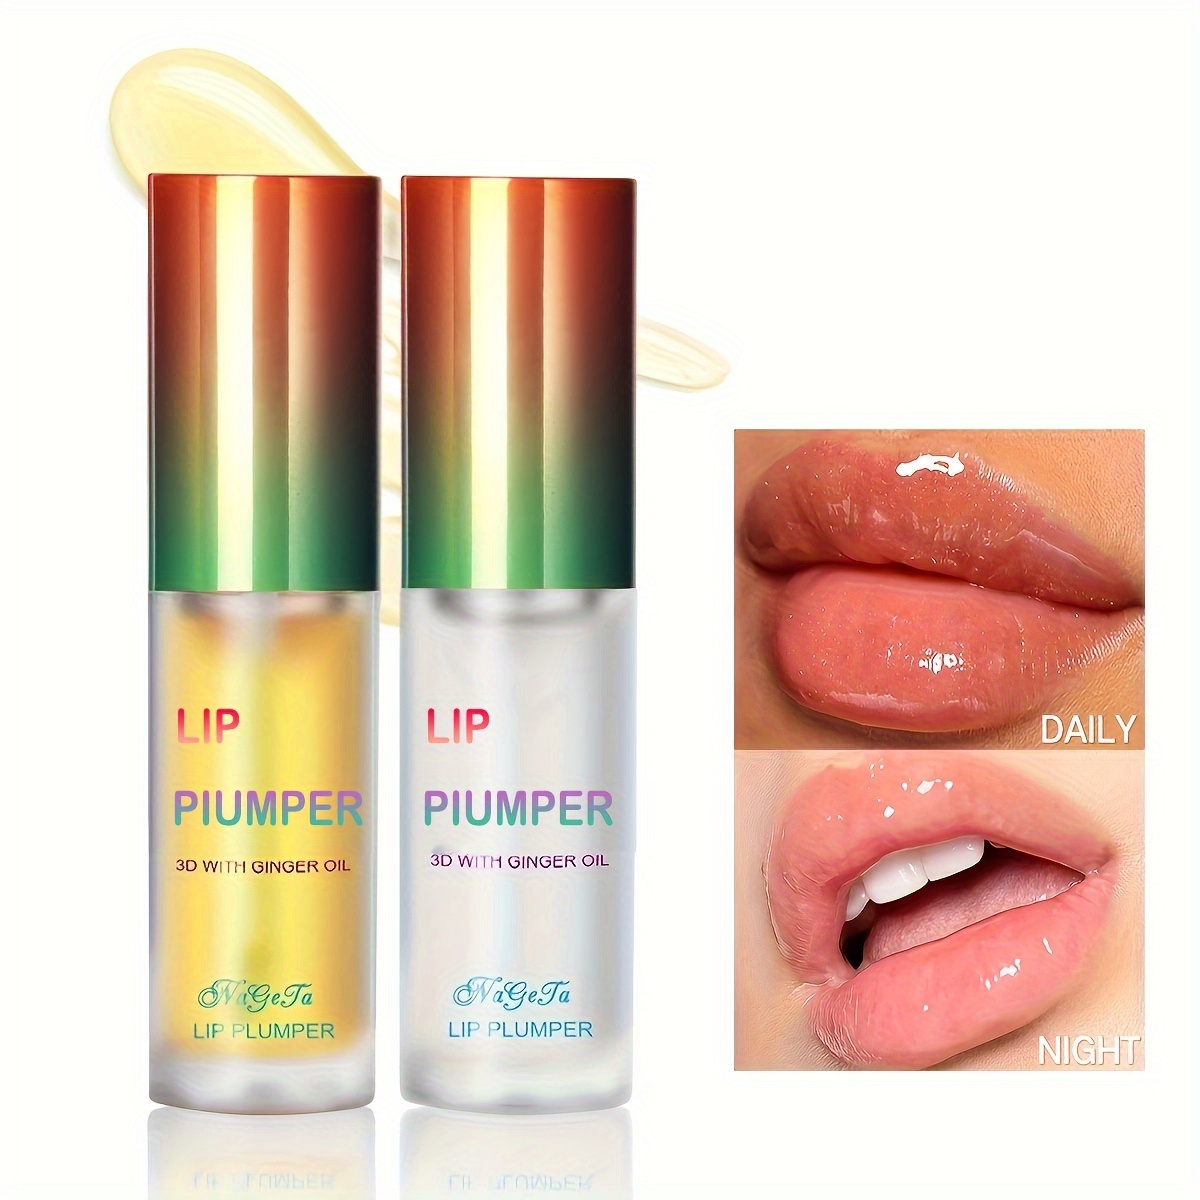 

Ginger And Mint Lip Plumper Oil Set - Glowing, Volumizing Lip Serum For Smoother, Fuller Lips